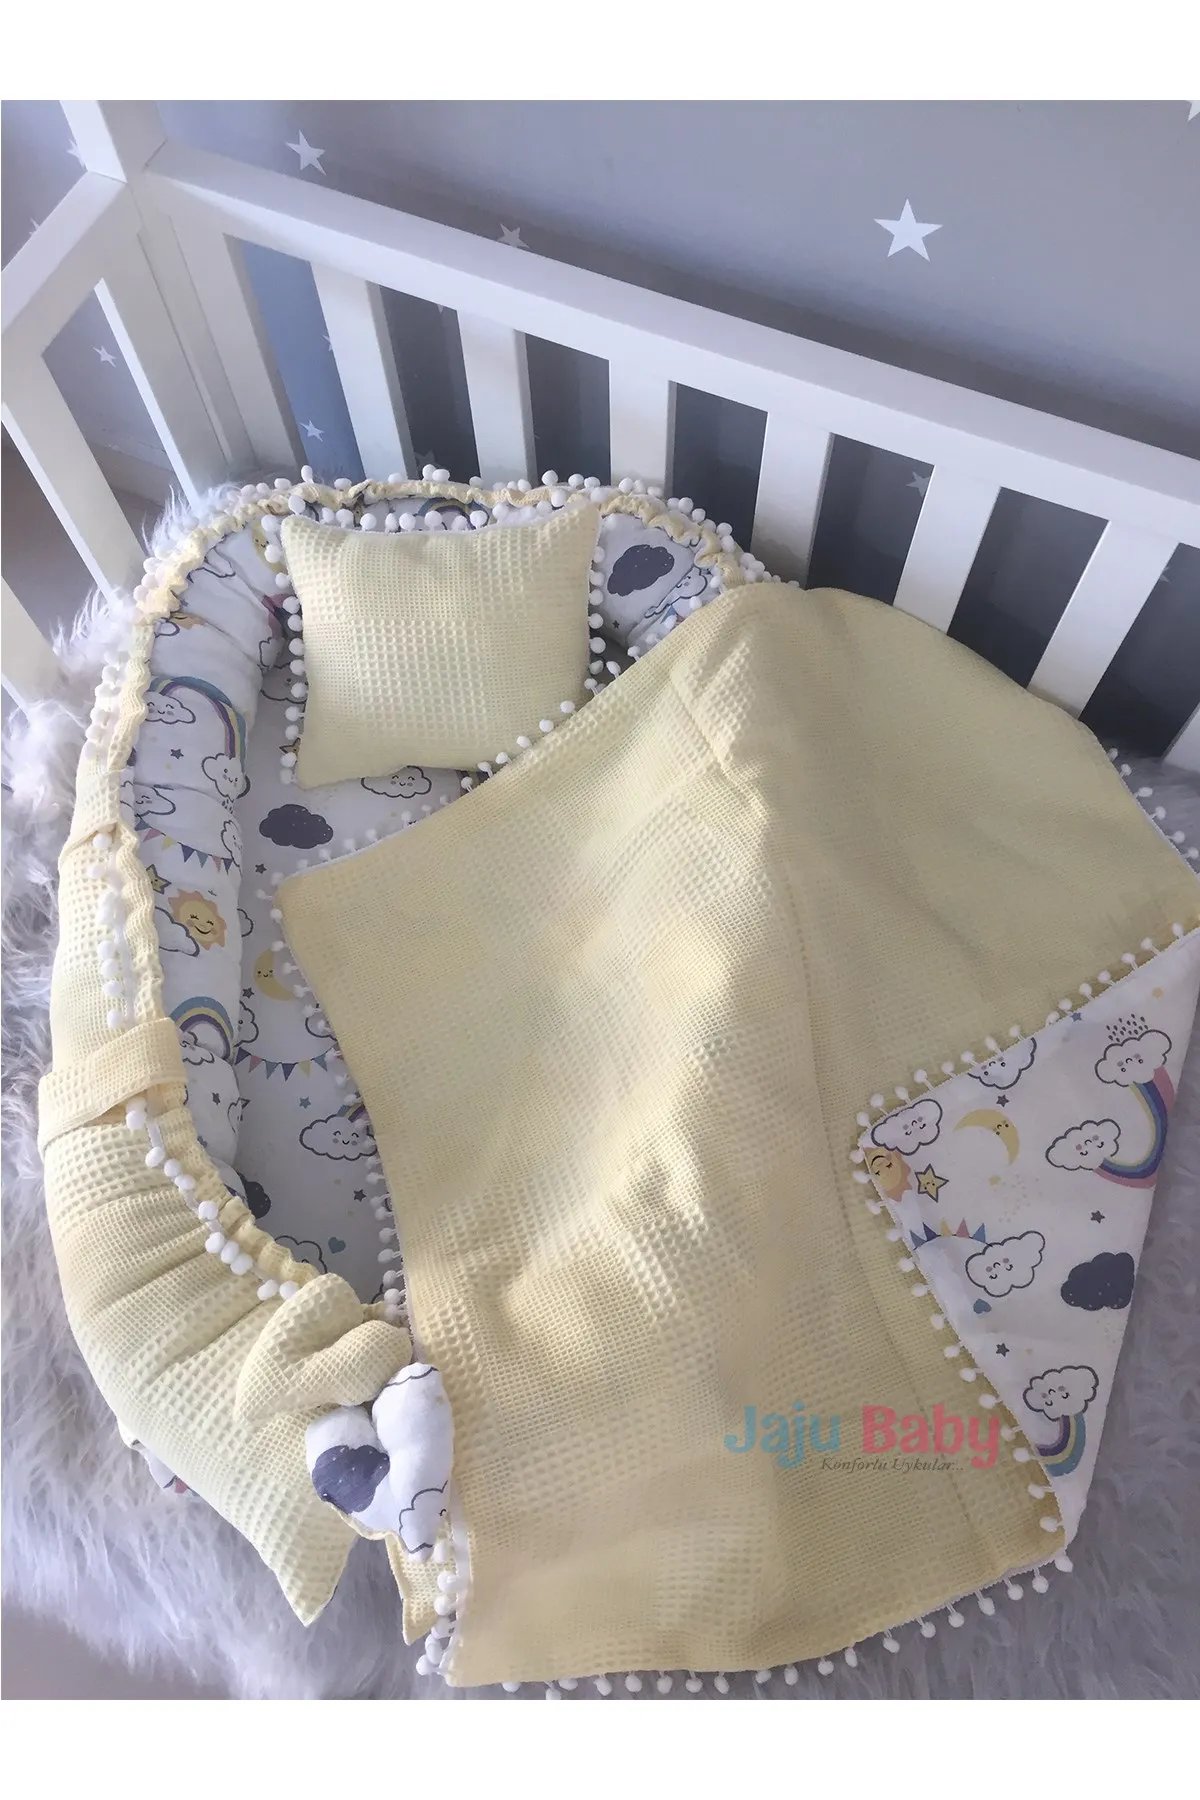 Jaju Baby Handmade Yellow Waffle Pique Fabric and Muslin Rainbow Design Pompom Set of 3 Babynest Mother Side Portable Baby Bed